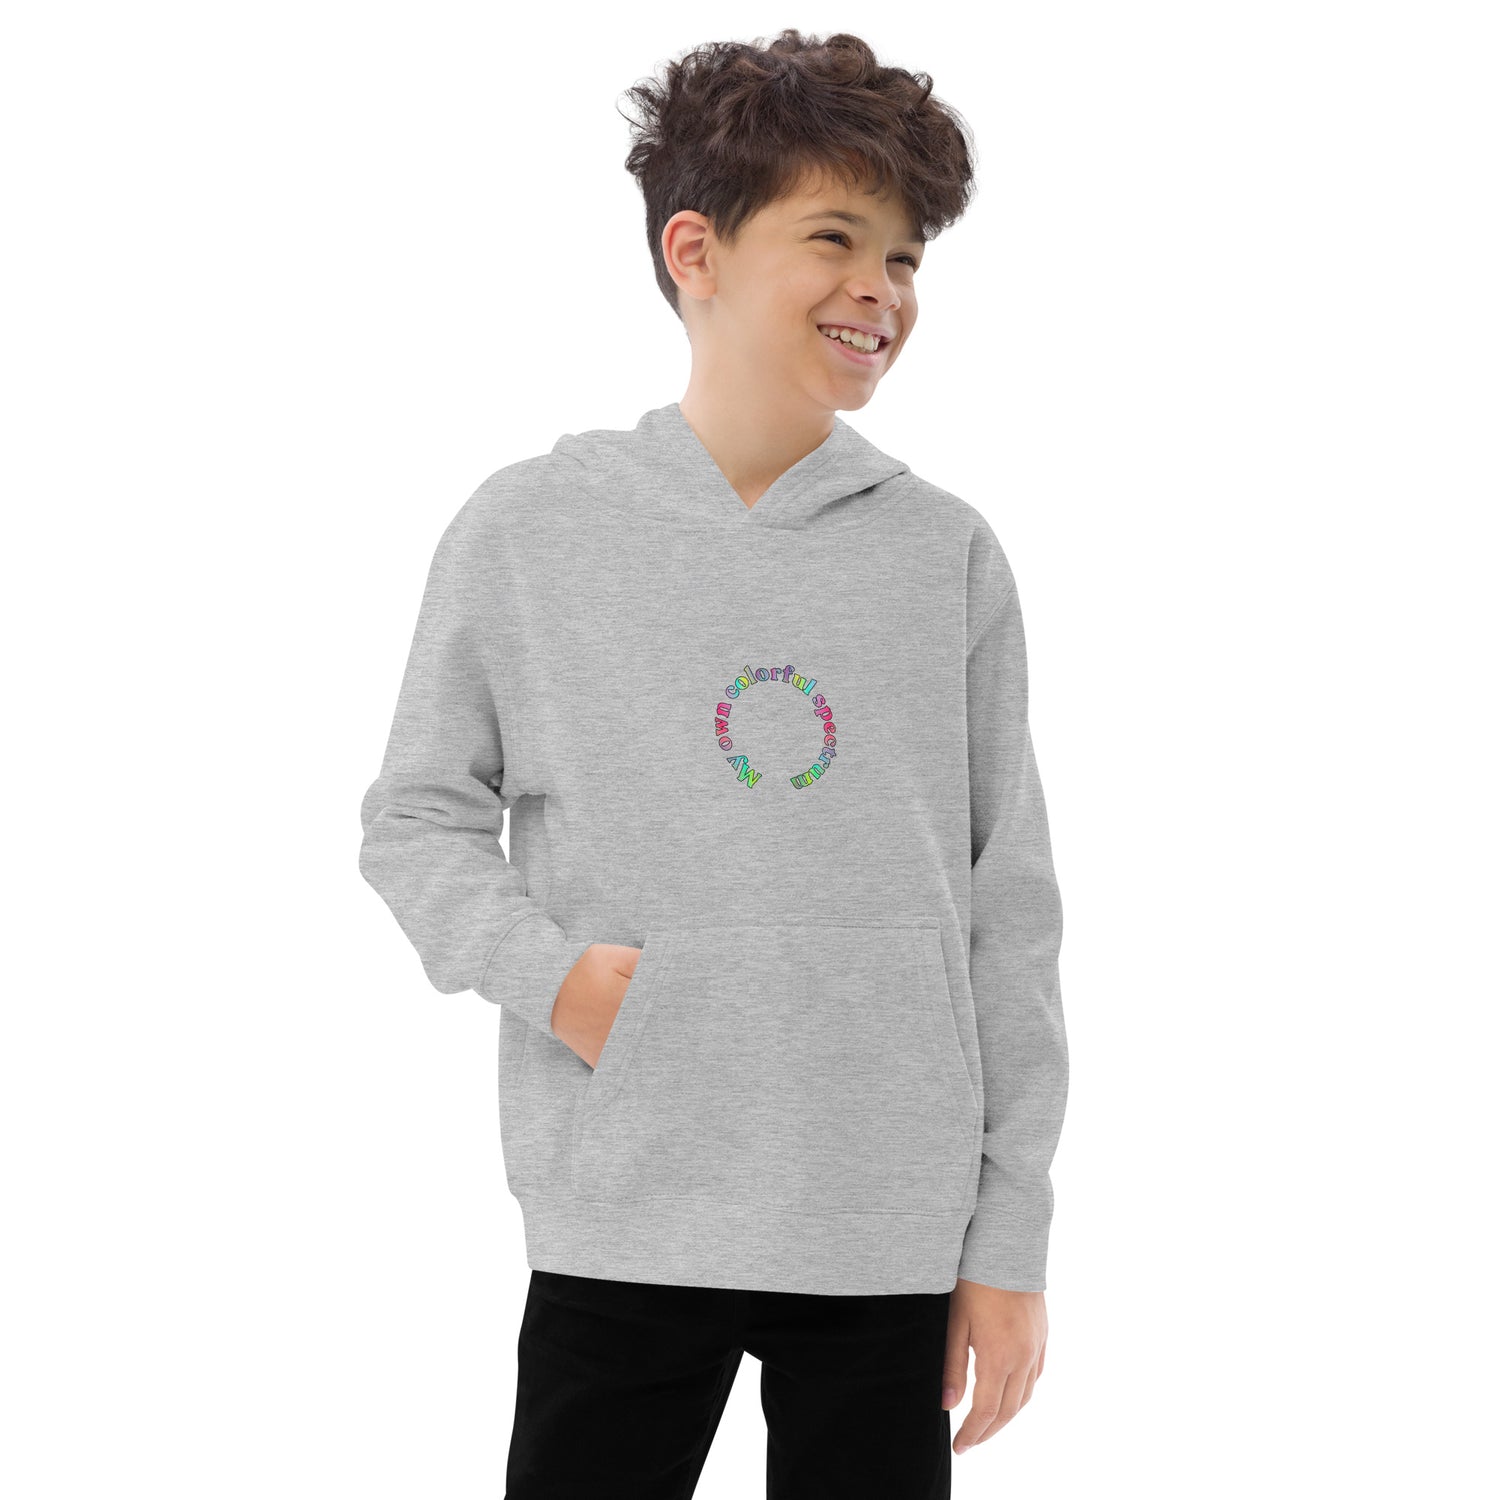 Front of Grey Kidswear hoodie featuring " My own colorful spectrum" design.